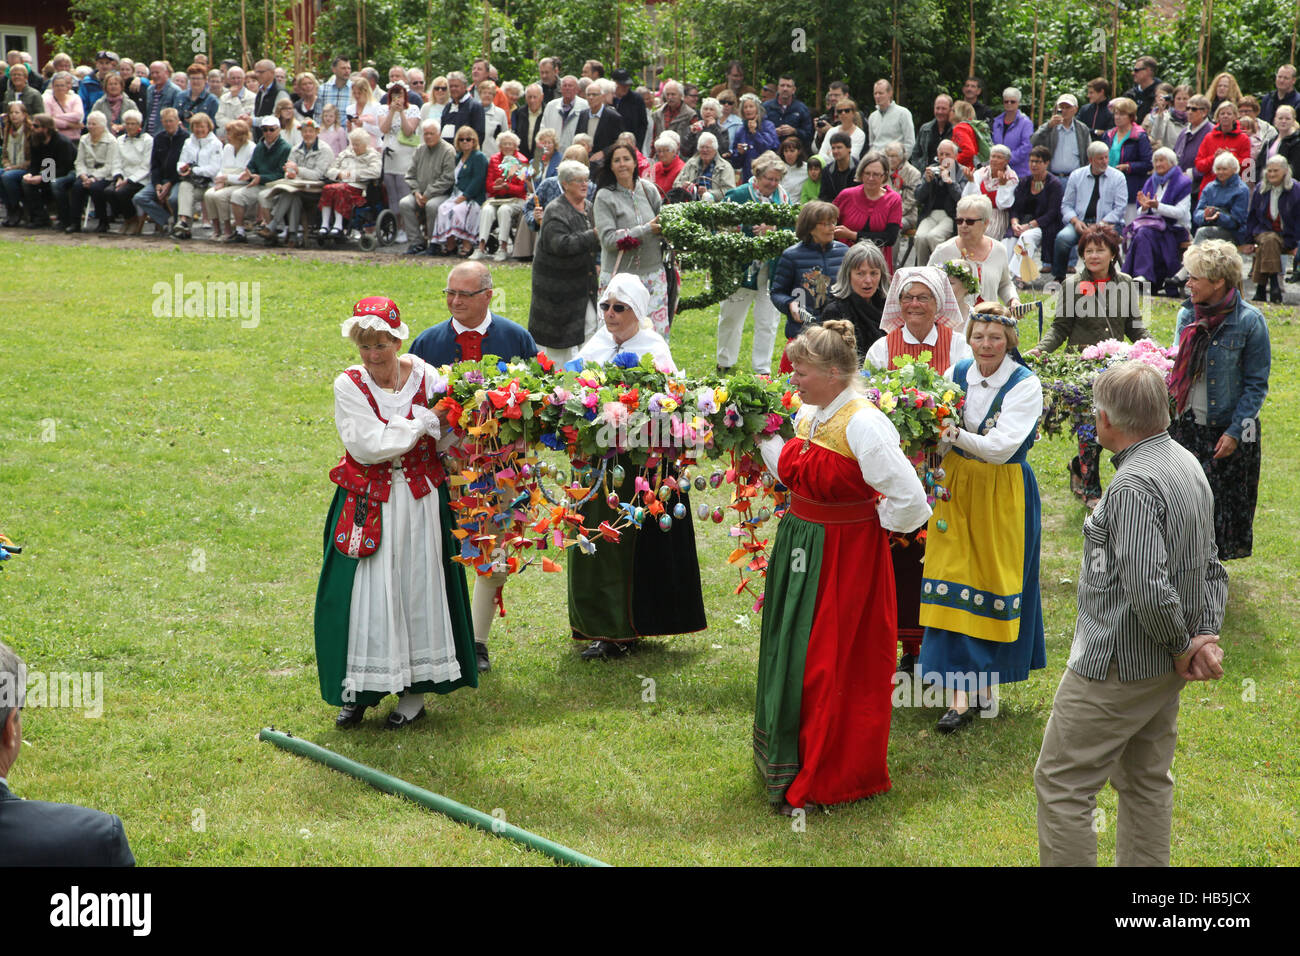 MID SUMMER Celebration at Malmkoping Sweden 2015 The Maypole will be dressed Stock Photo